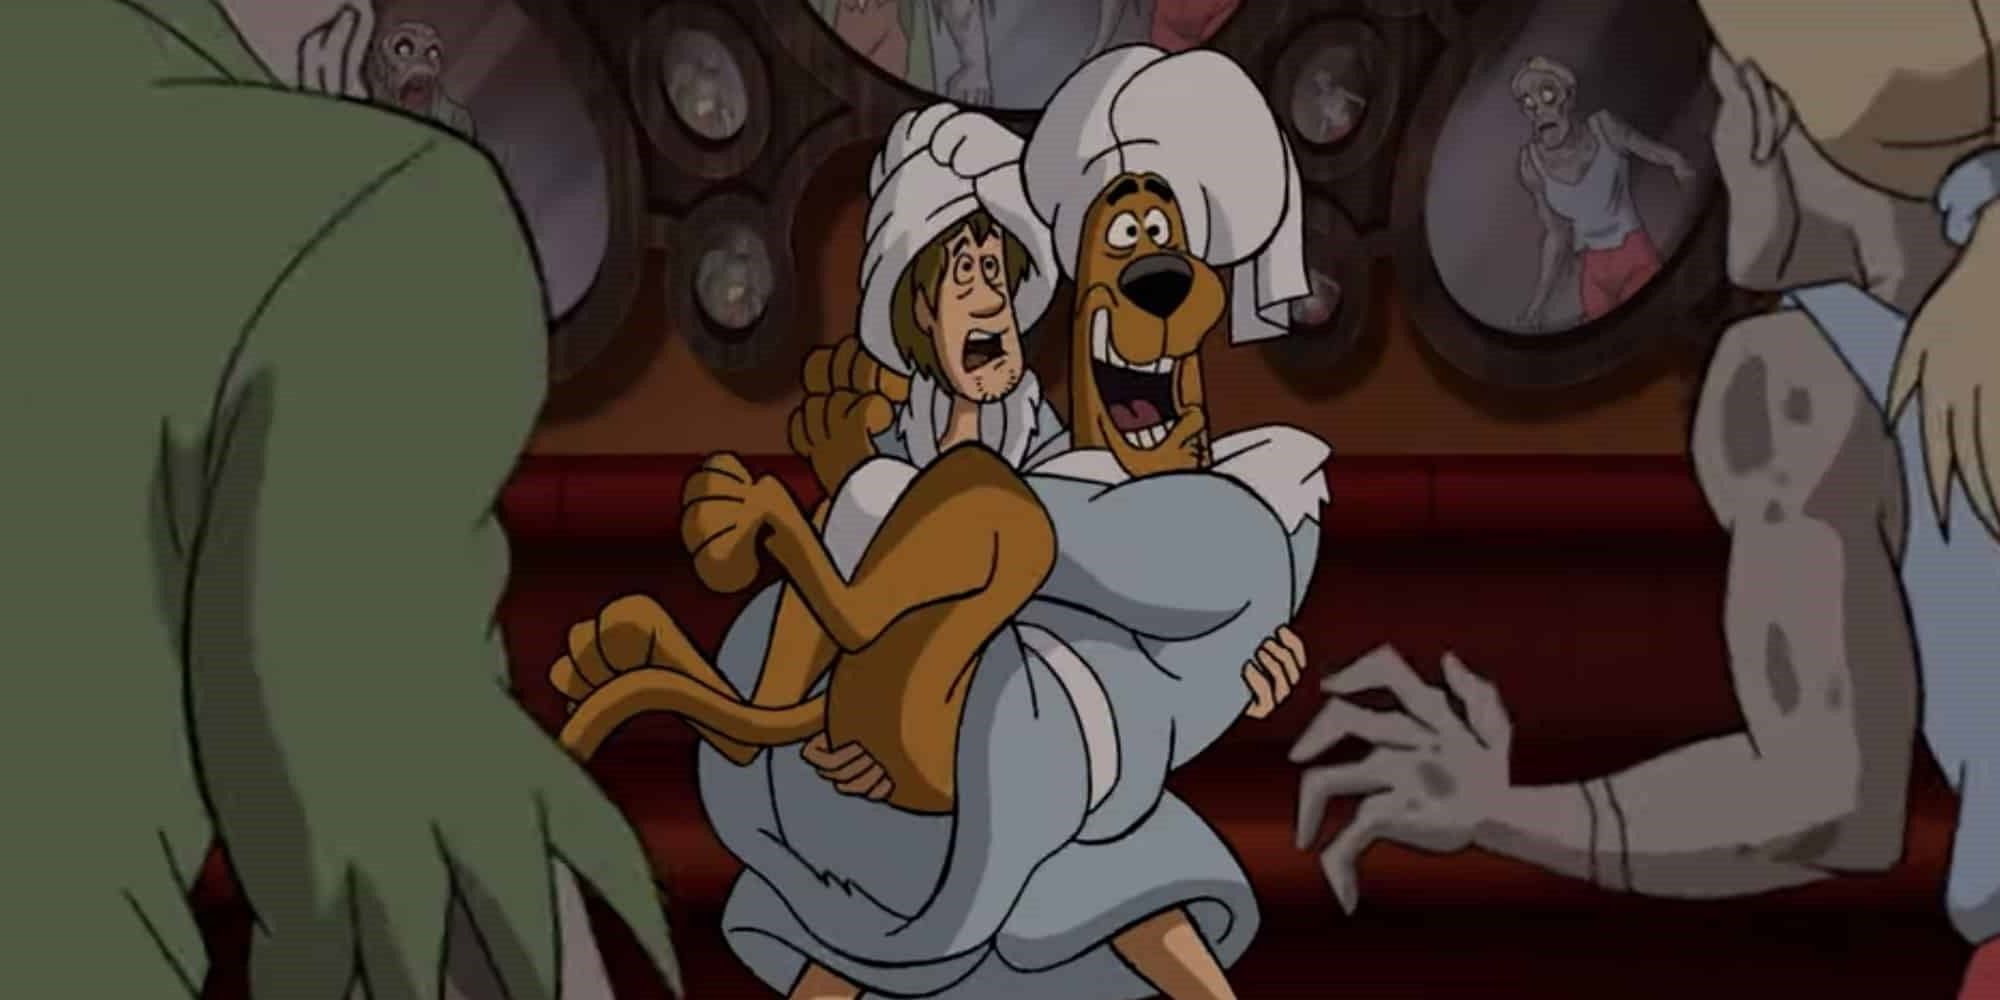 Shaggy Rogers and Scooby Doo in Scooby Doo: Return to Zombie Island movie